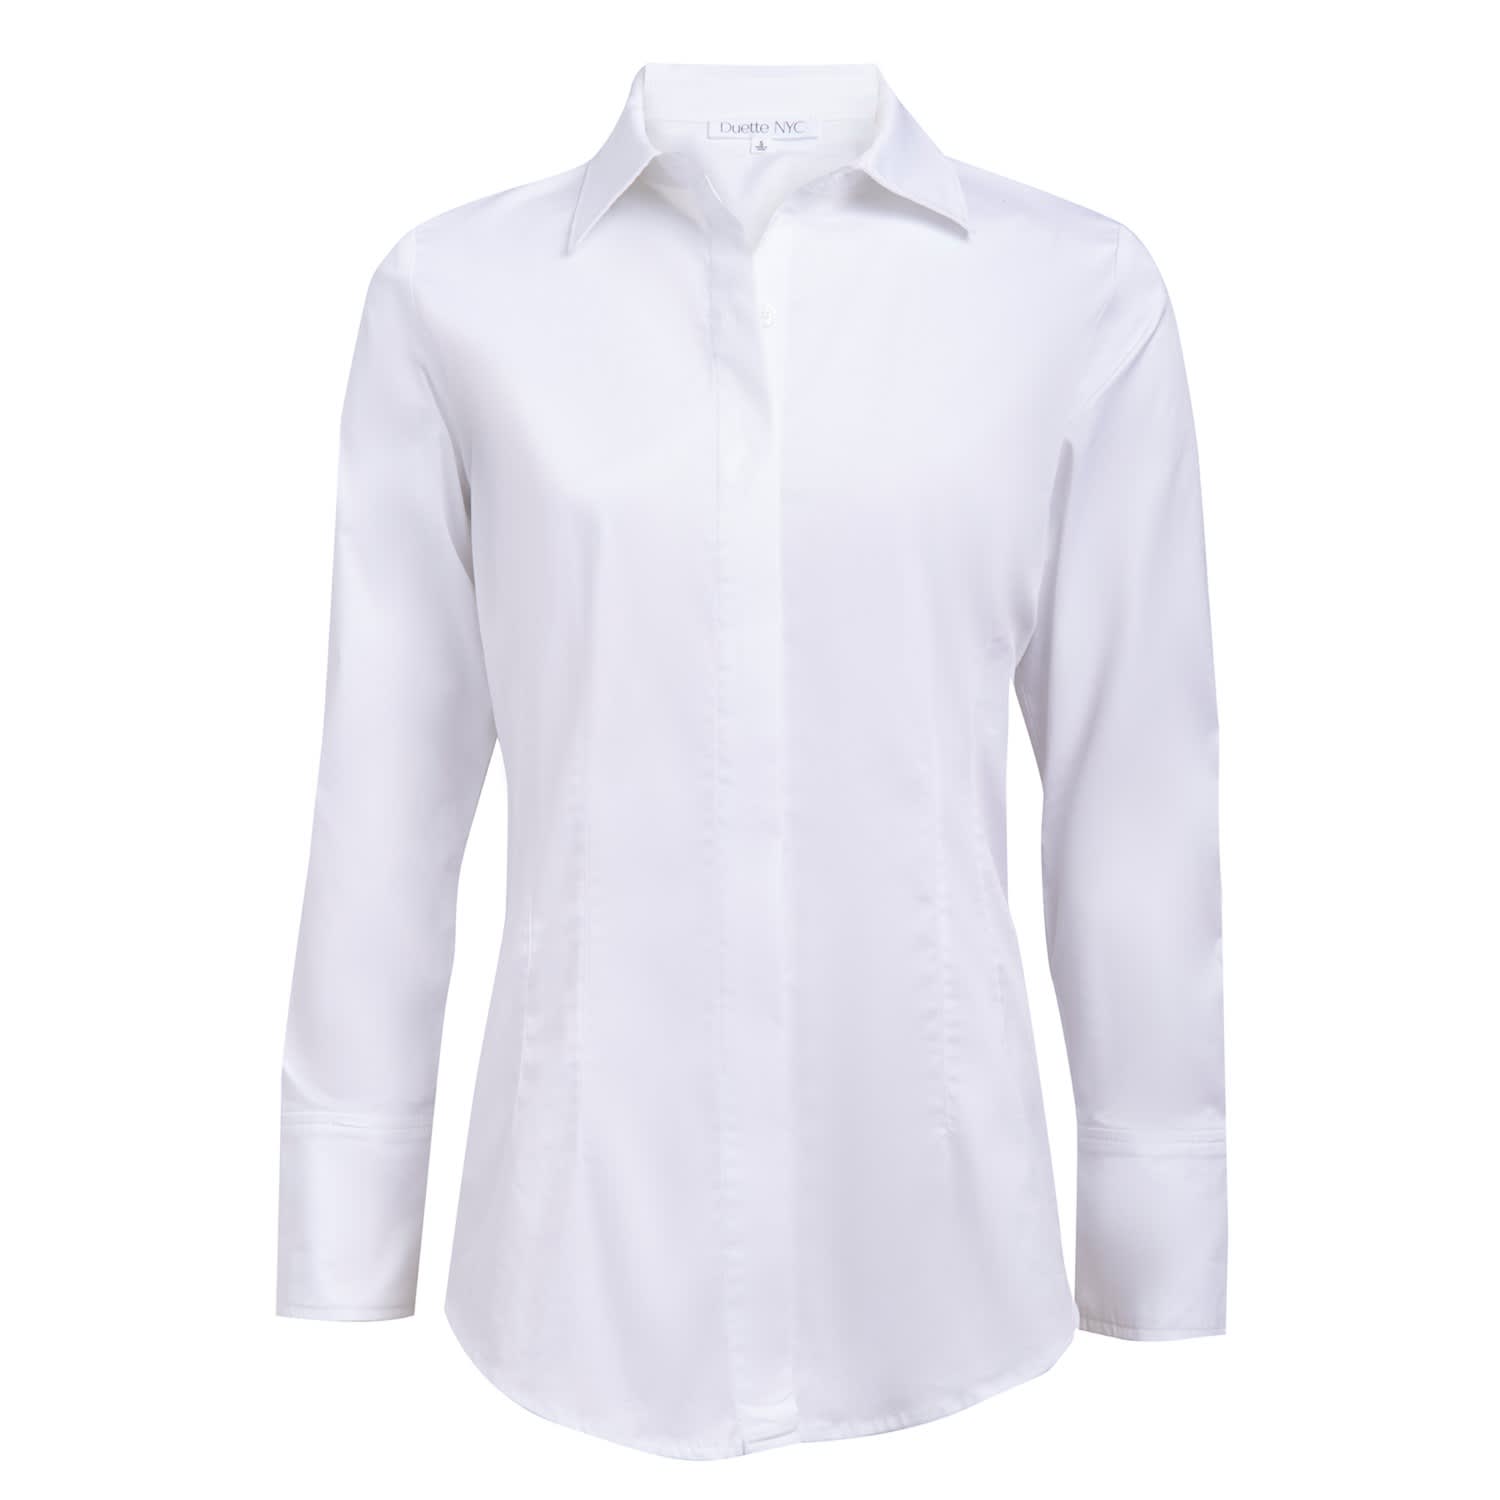 Organic Stretch Cotton Classic Tailored White Shirt - The Reade